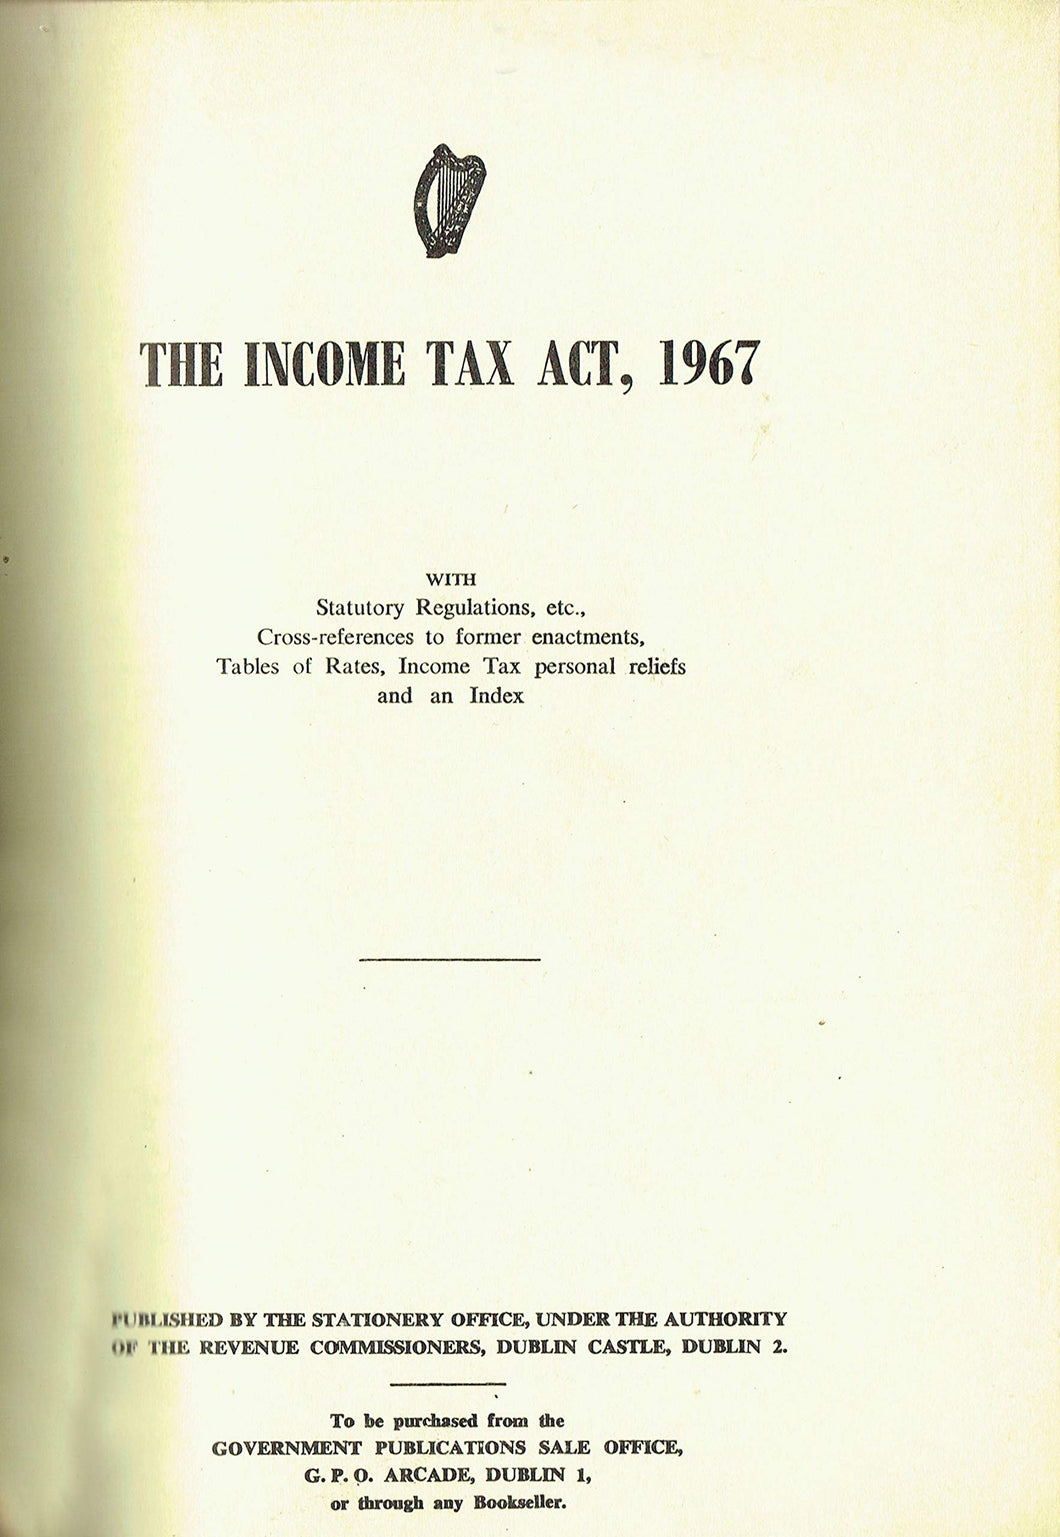 The Income Tax Act, 1967 - With Statutory Regulations, etc., Cross-references to former enactments, Tables of Rates, Income Tax personal reliefs and an Indes